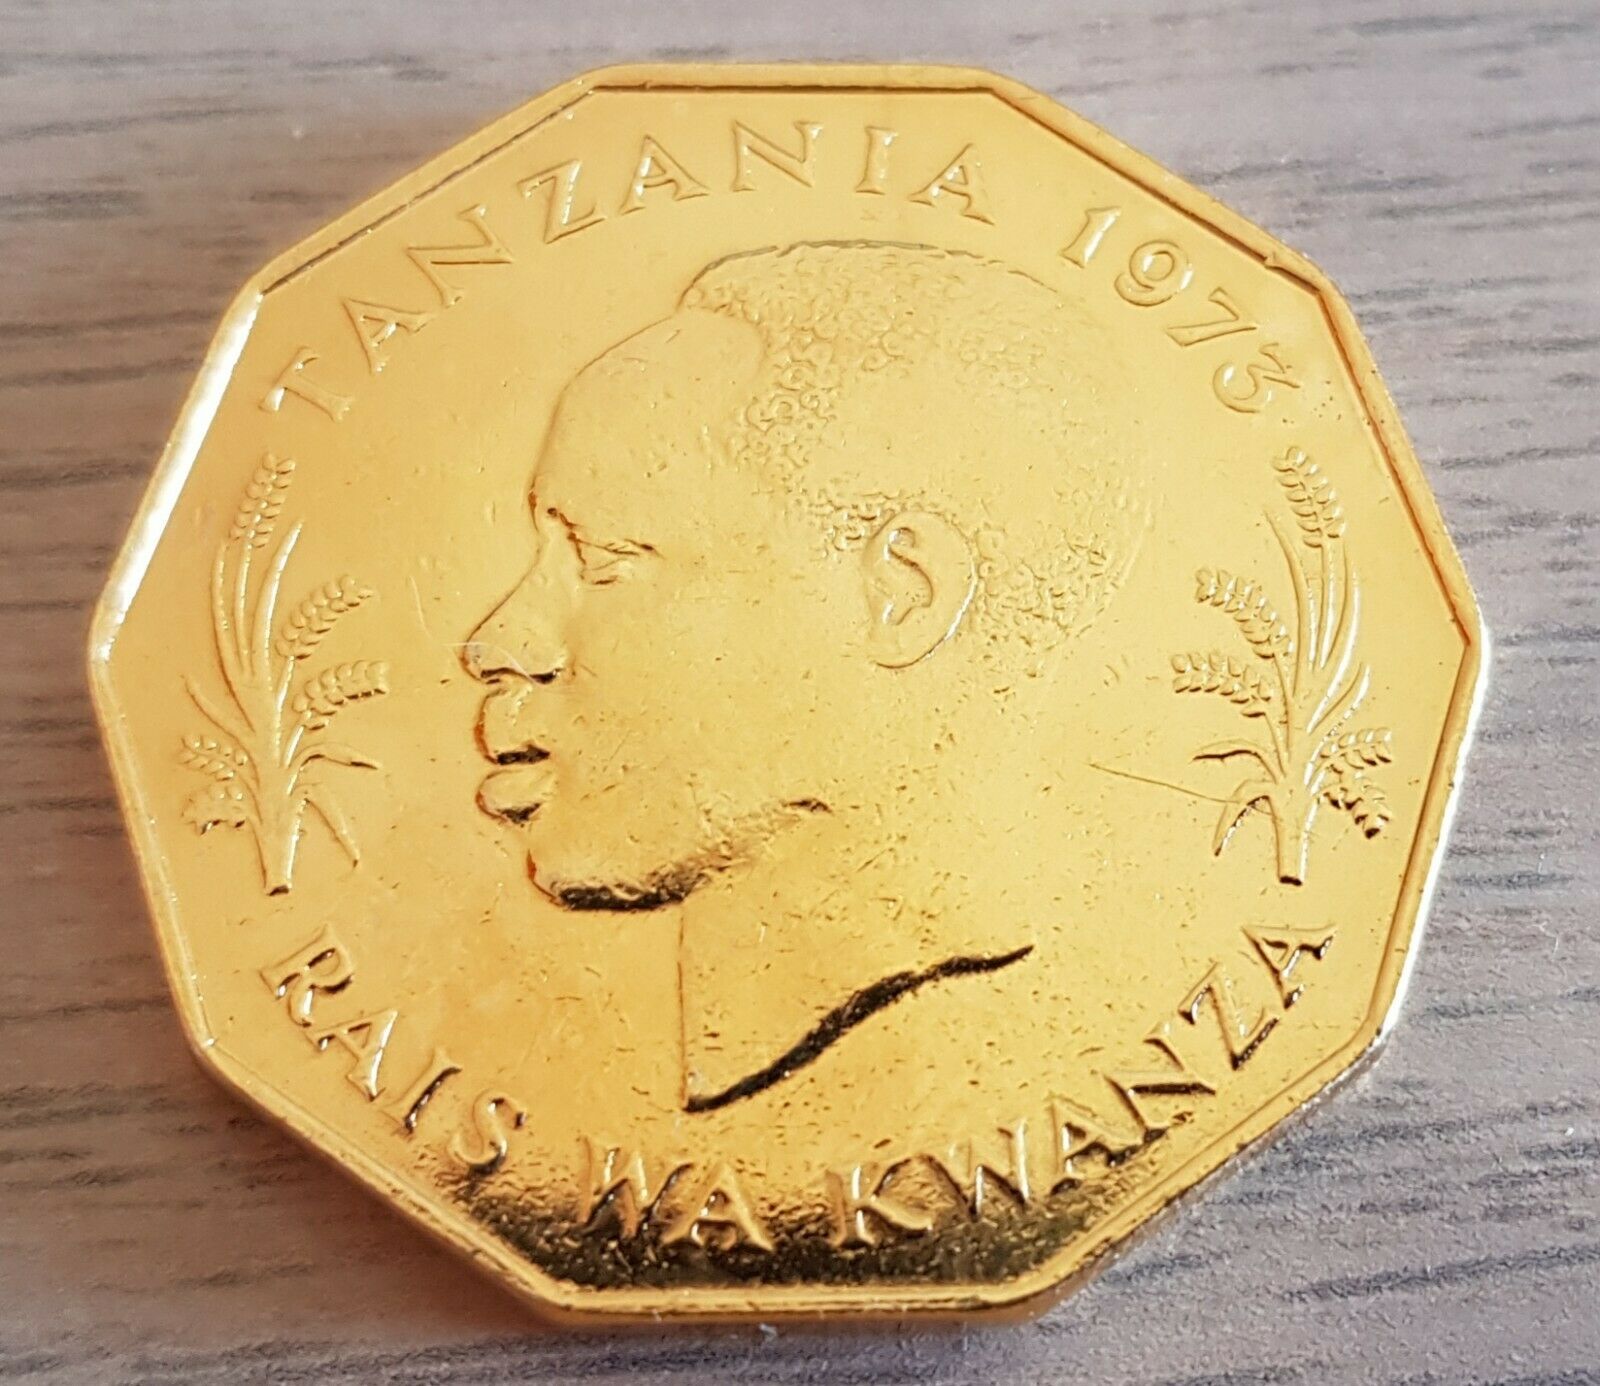 Tanzania 1974 5 Shillings Gold Plated Coin Makes A Terrific Gift